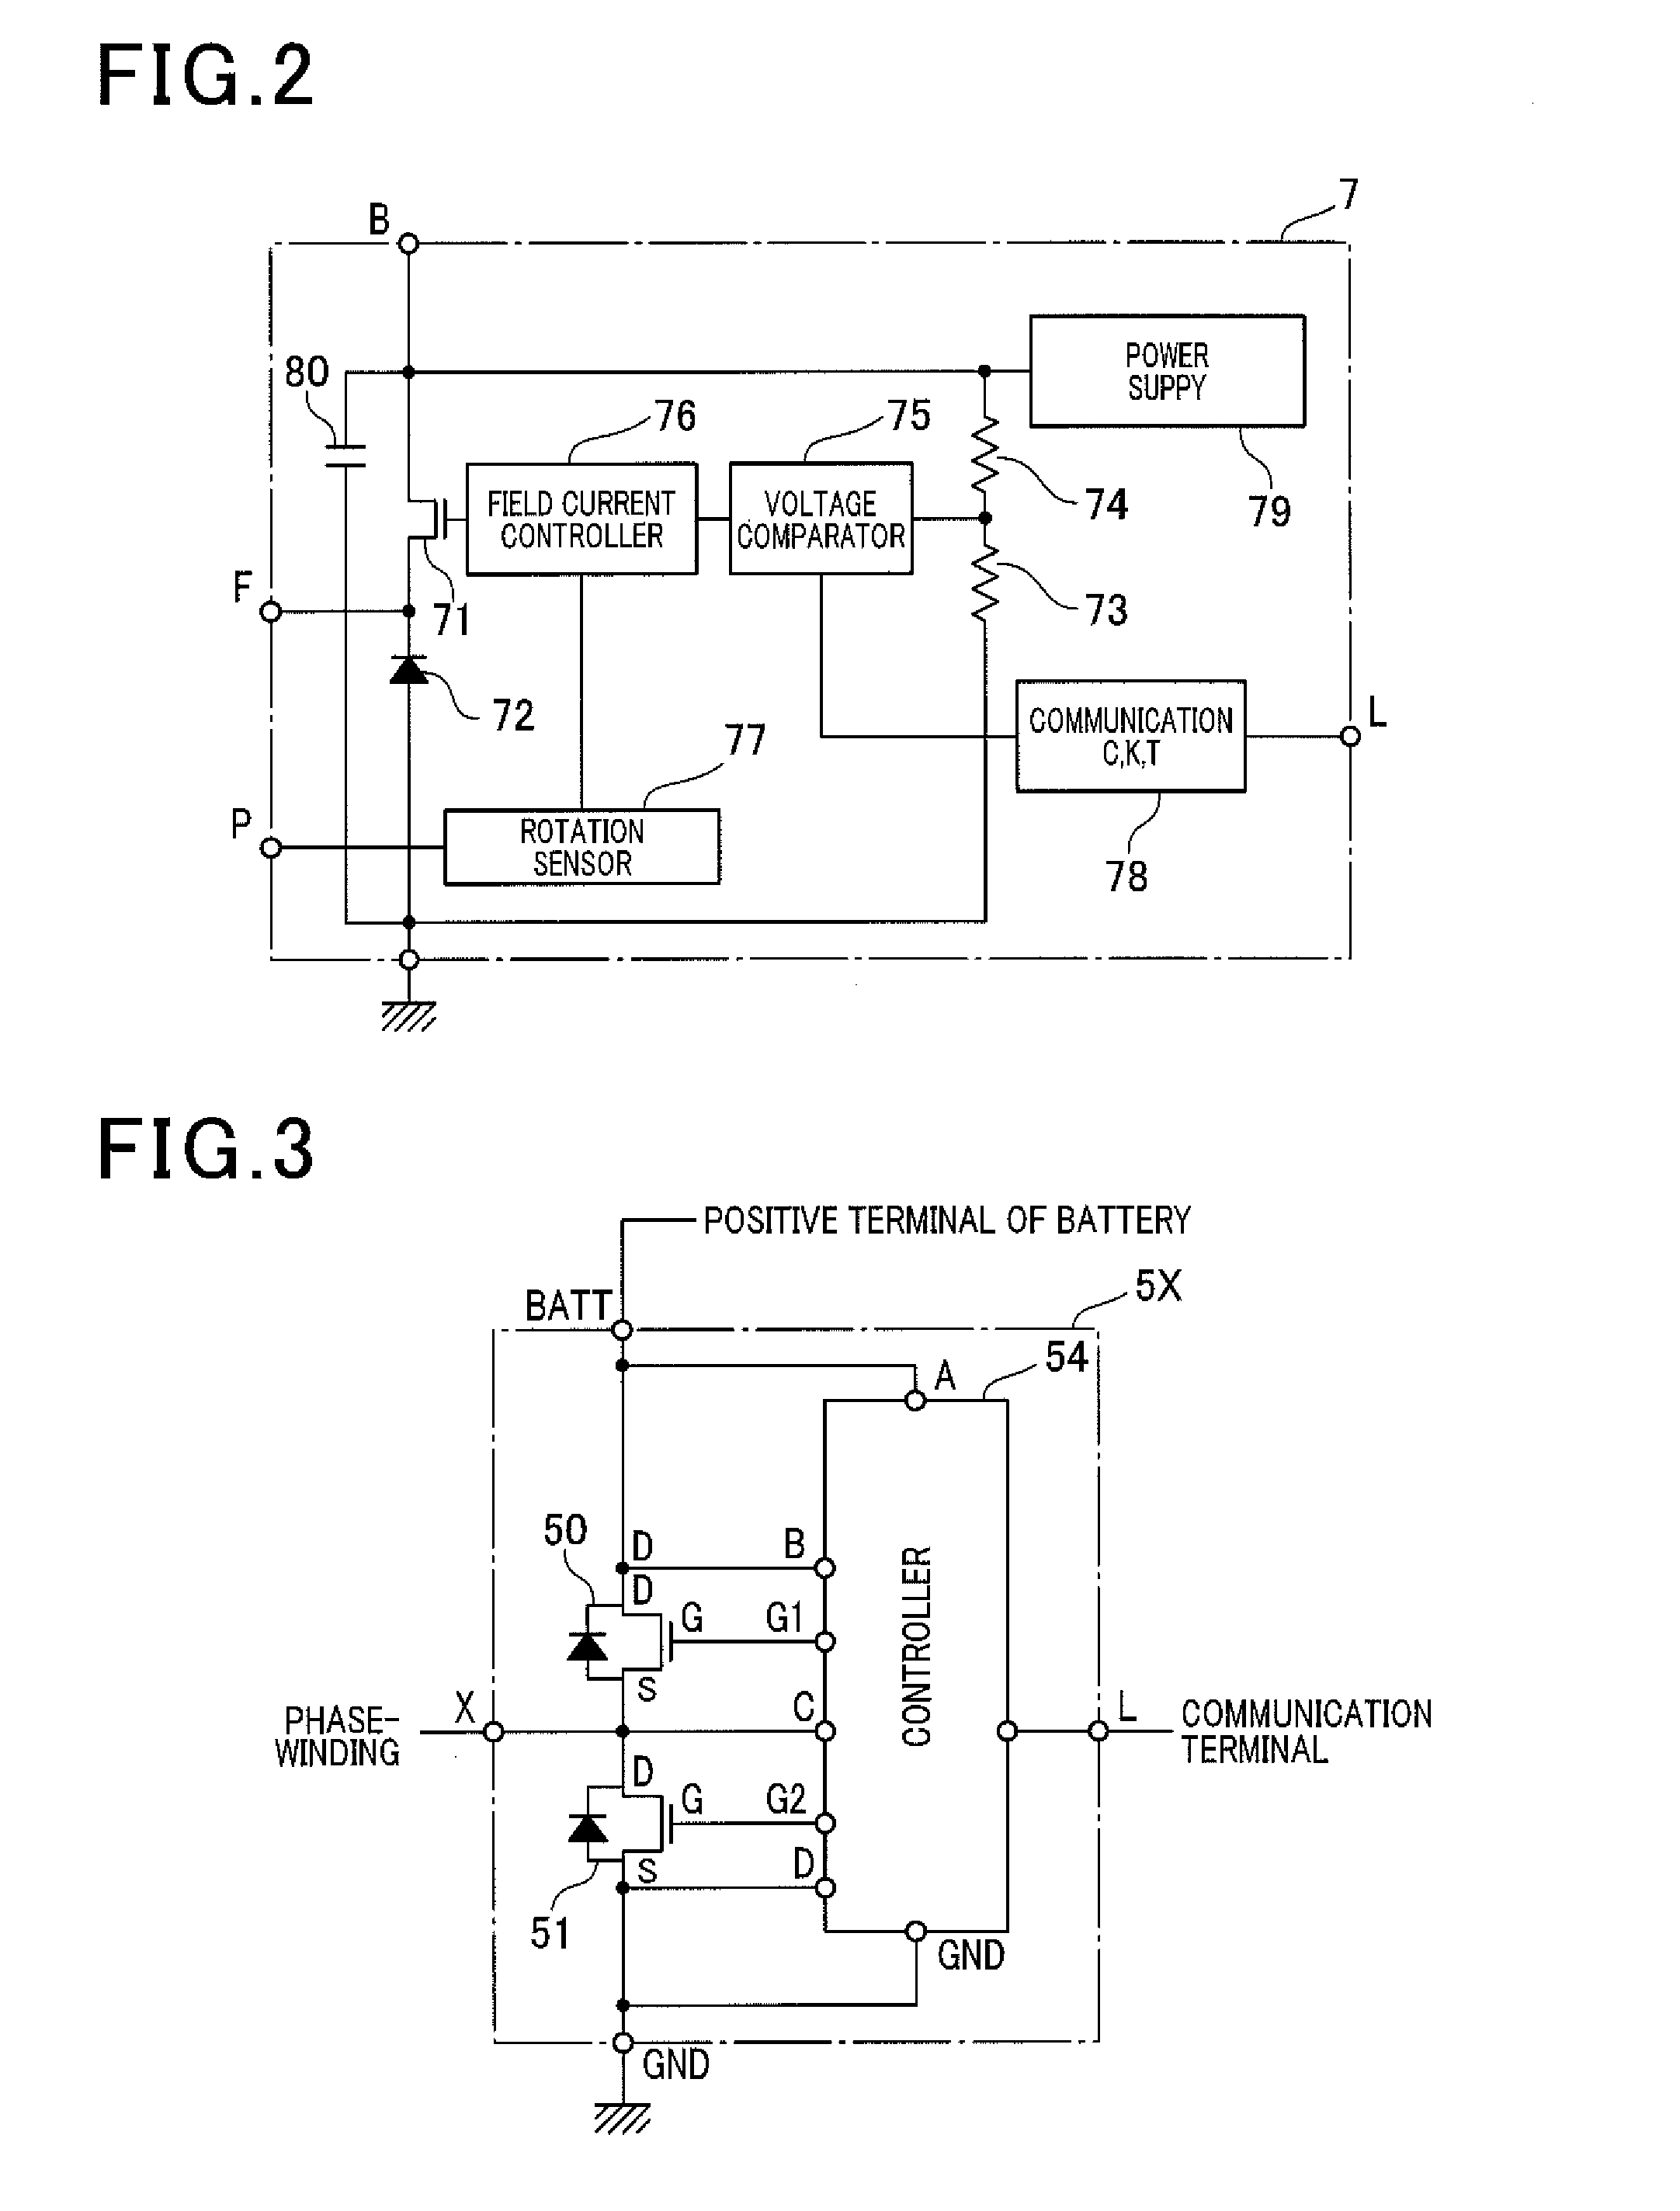 Electric rotating machine with load dump protector